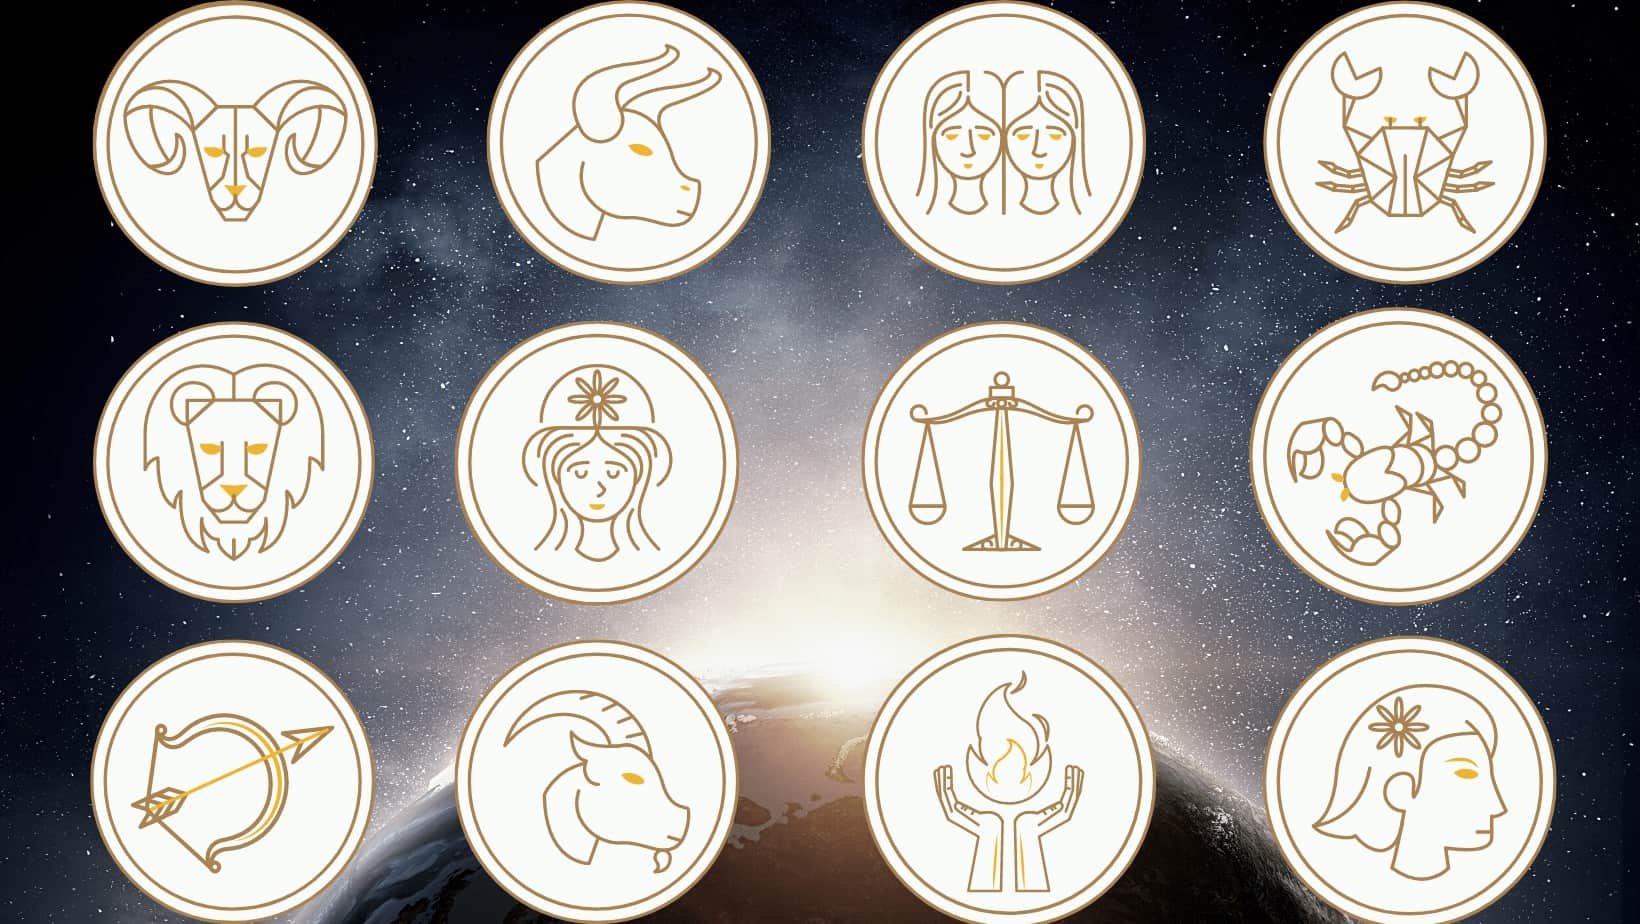 What Does Your September 2021 Horoscope Reveal According to Your Zodiac Sign?